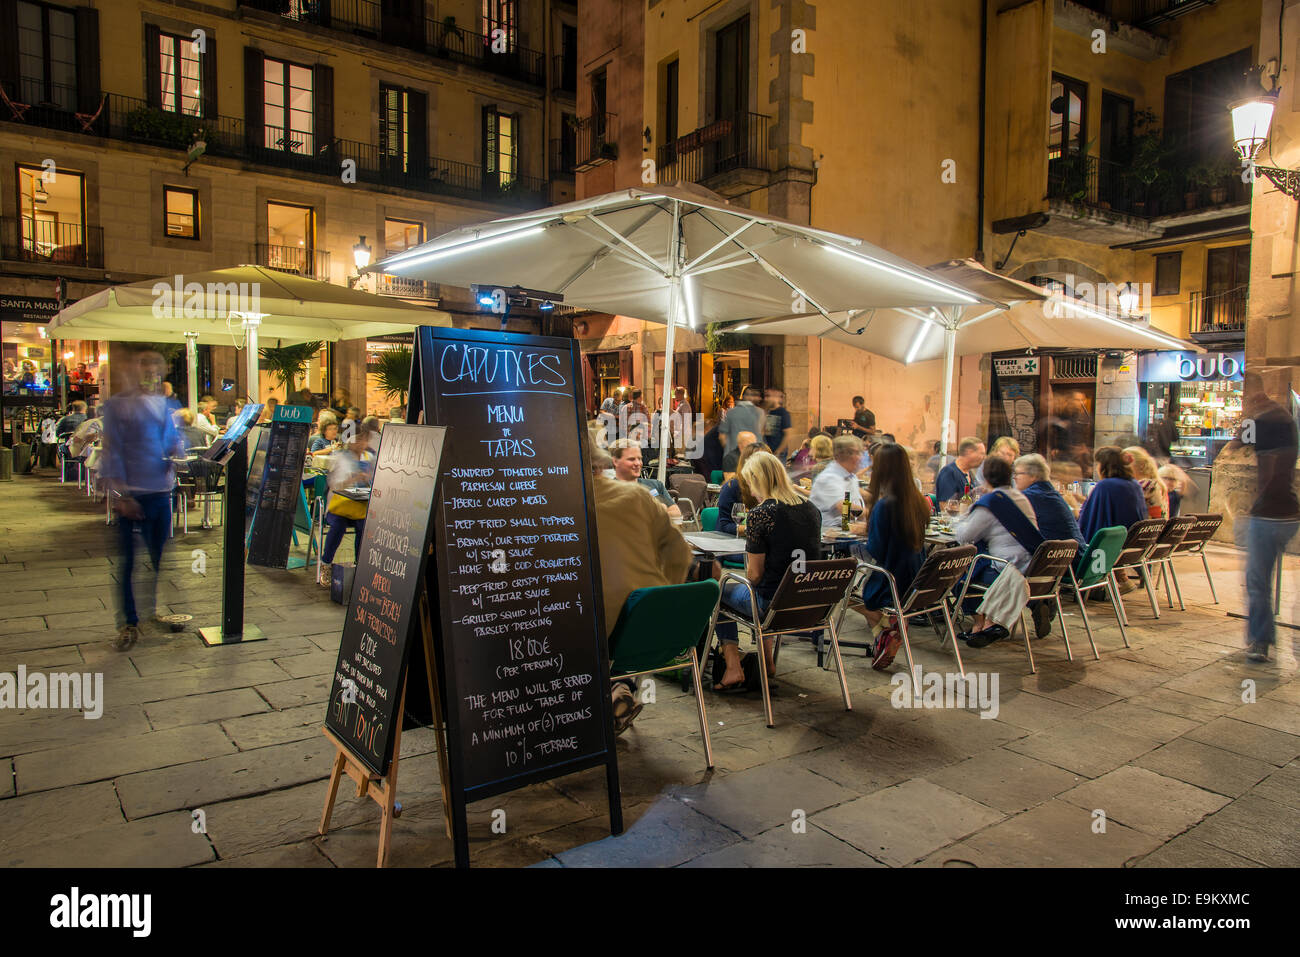 Night view of an outdoor cafe serving tapas with menu blackboard and people seated at tables, Barcelona, Catalonia, Spain Stock Photo